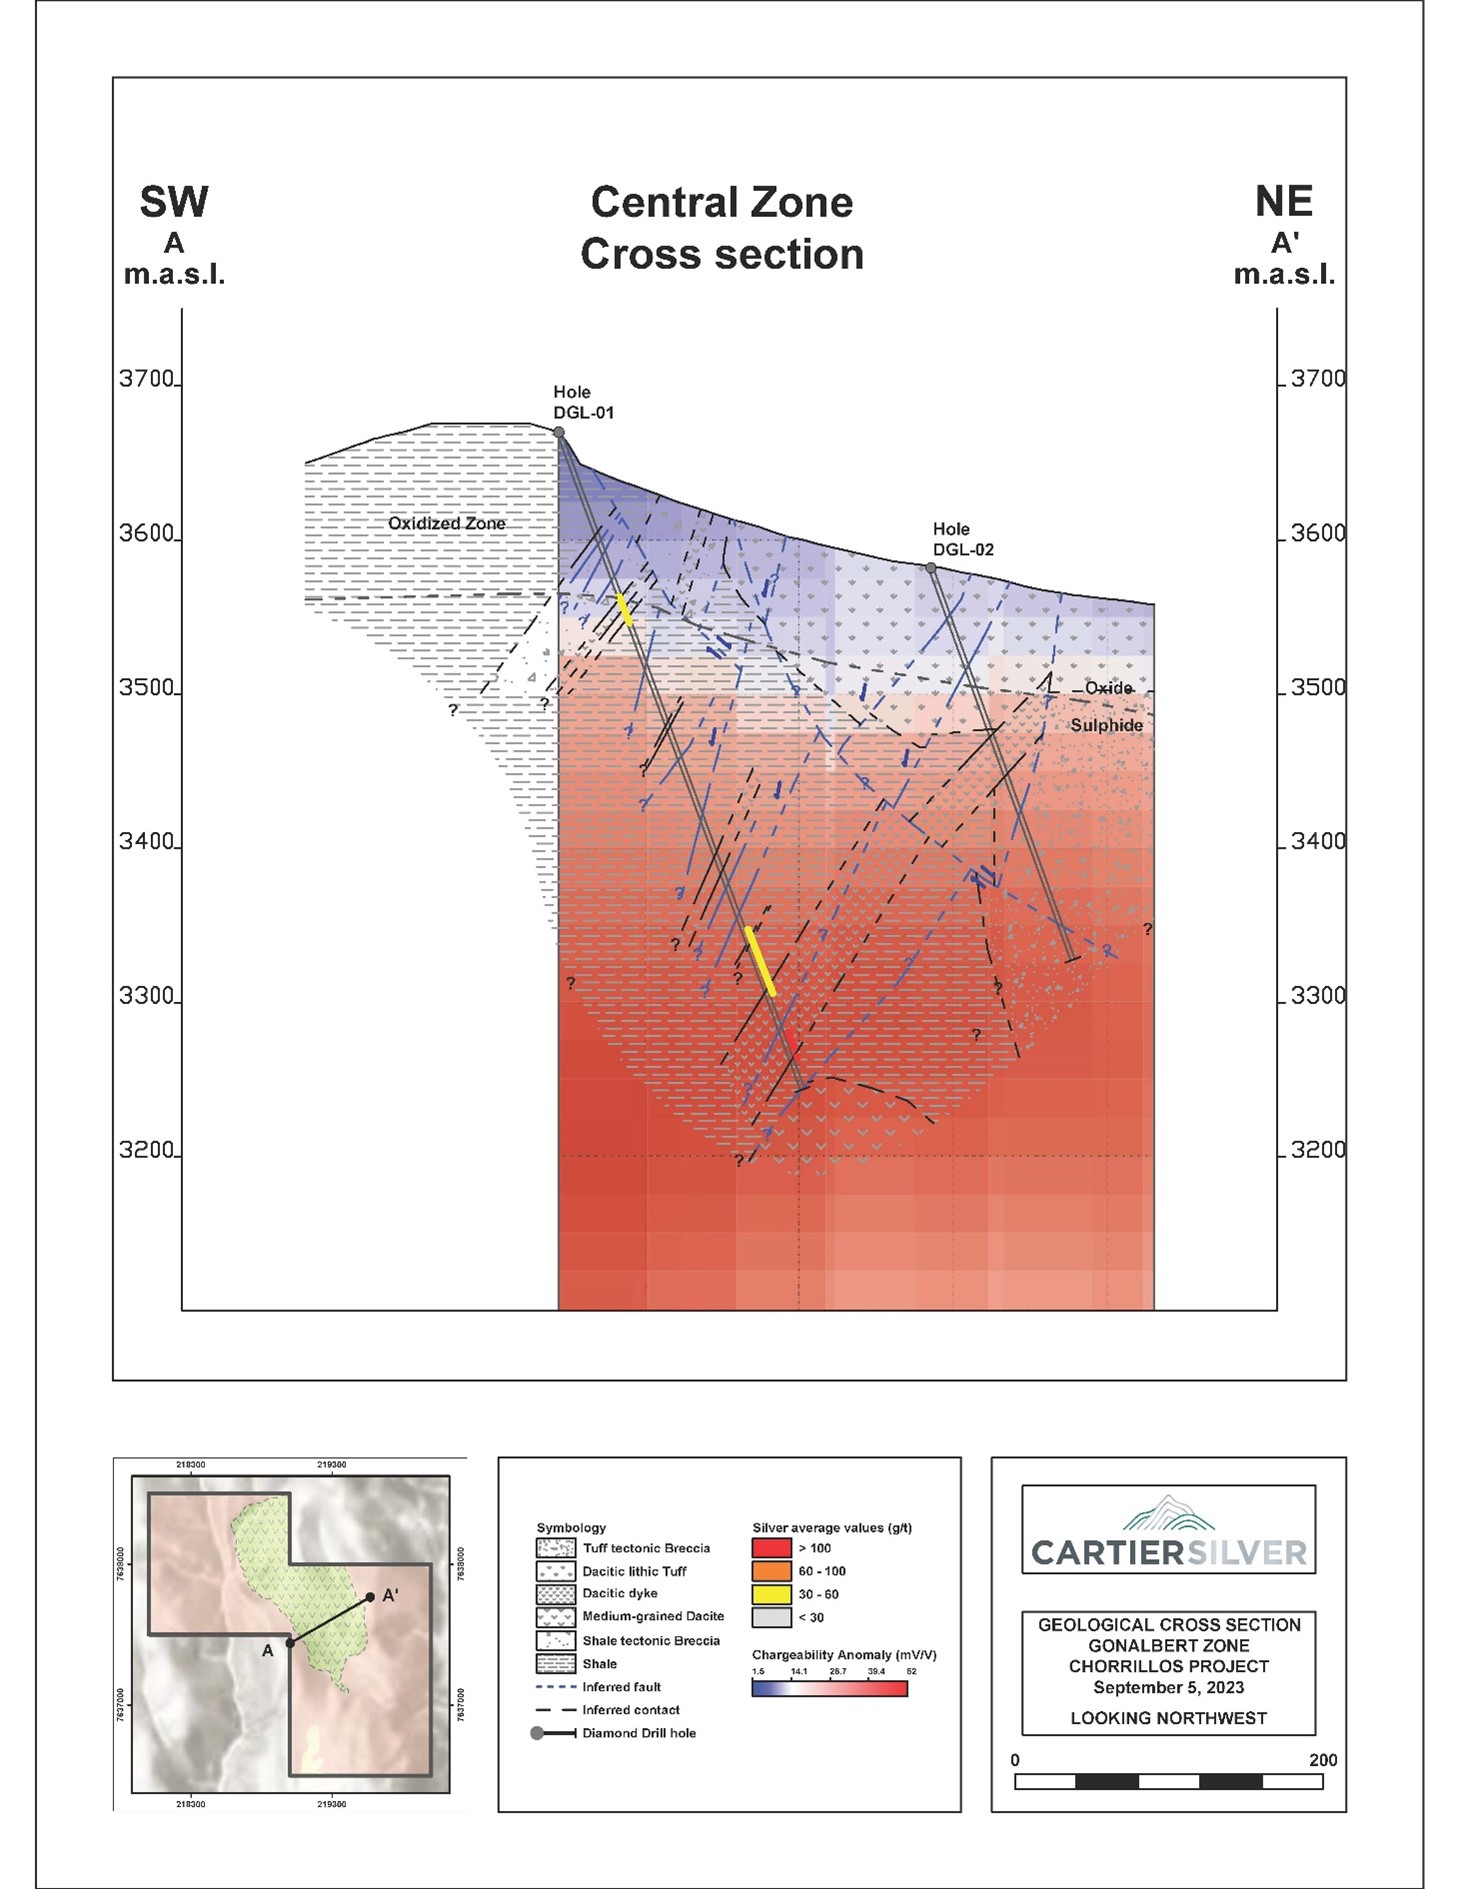 Chargeability Cross Section, Discovery Hole DGl-01, Gonalbert